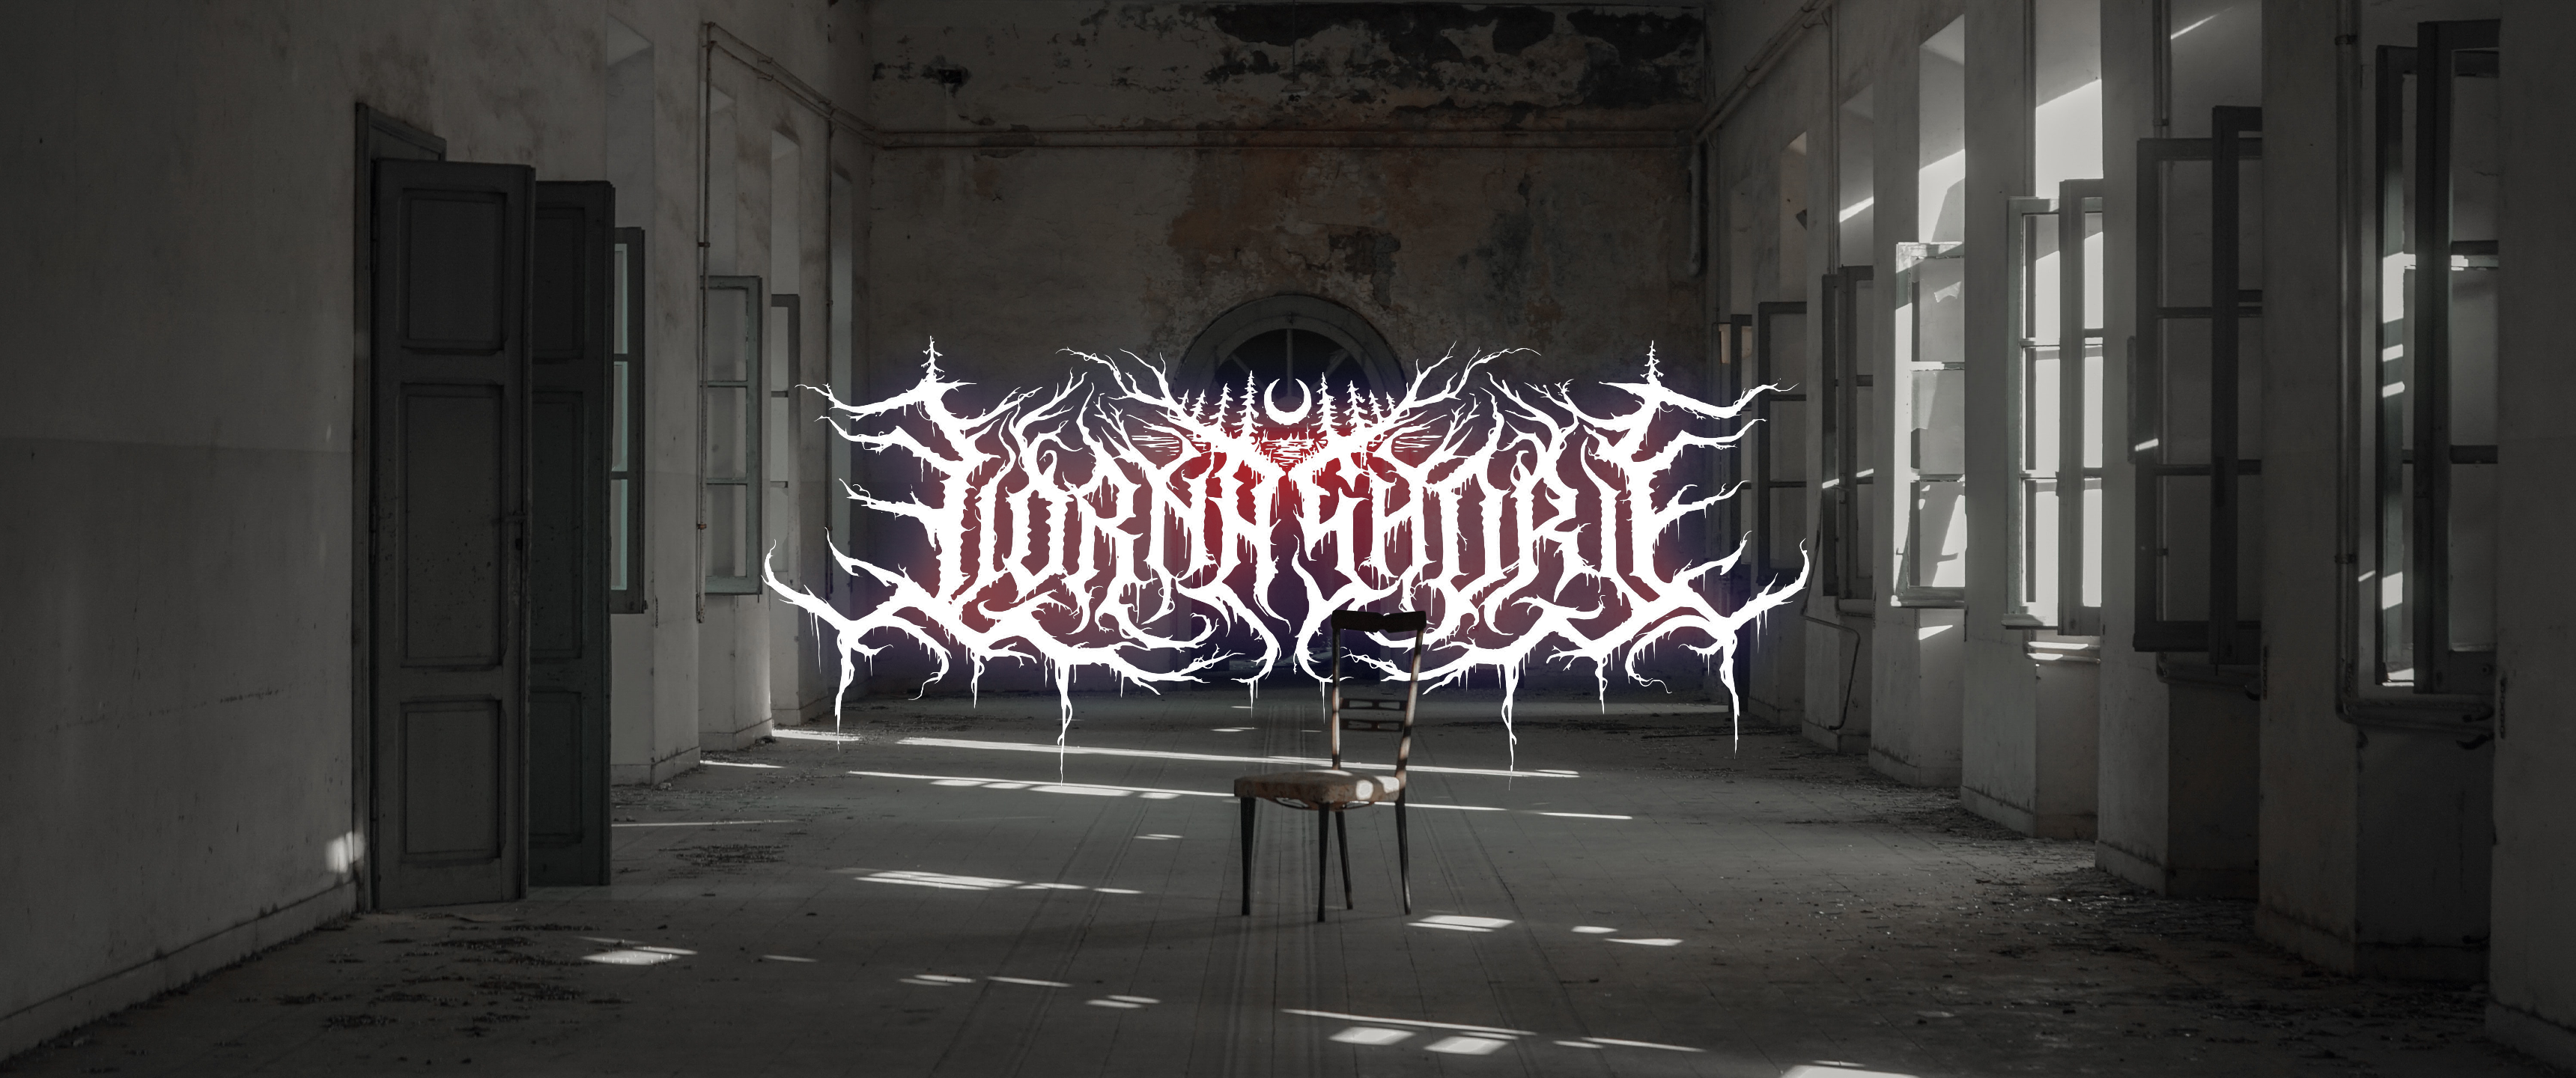 Lorna Shore Abandoned Room Chair Building Deathcore 3440x1440